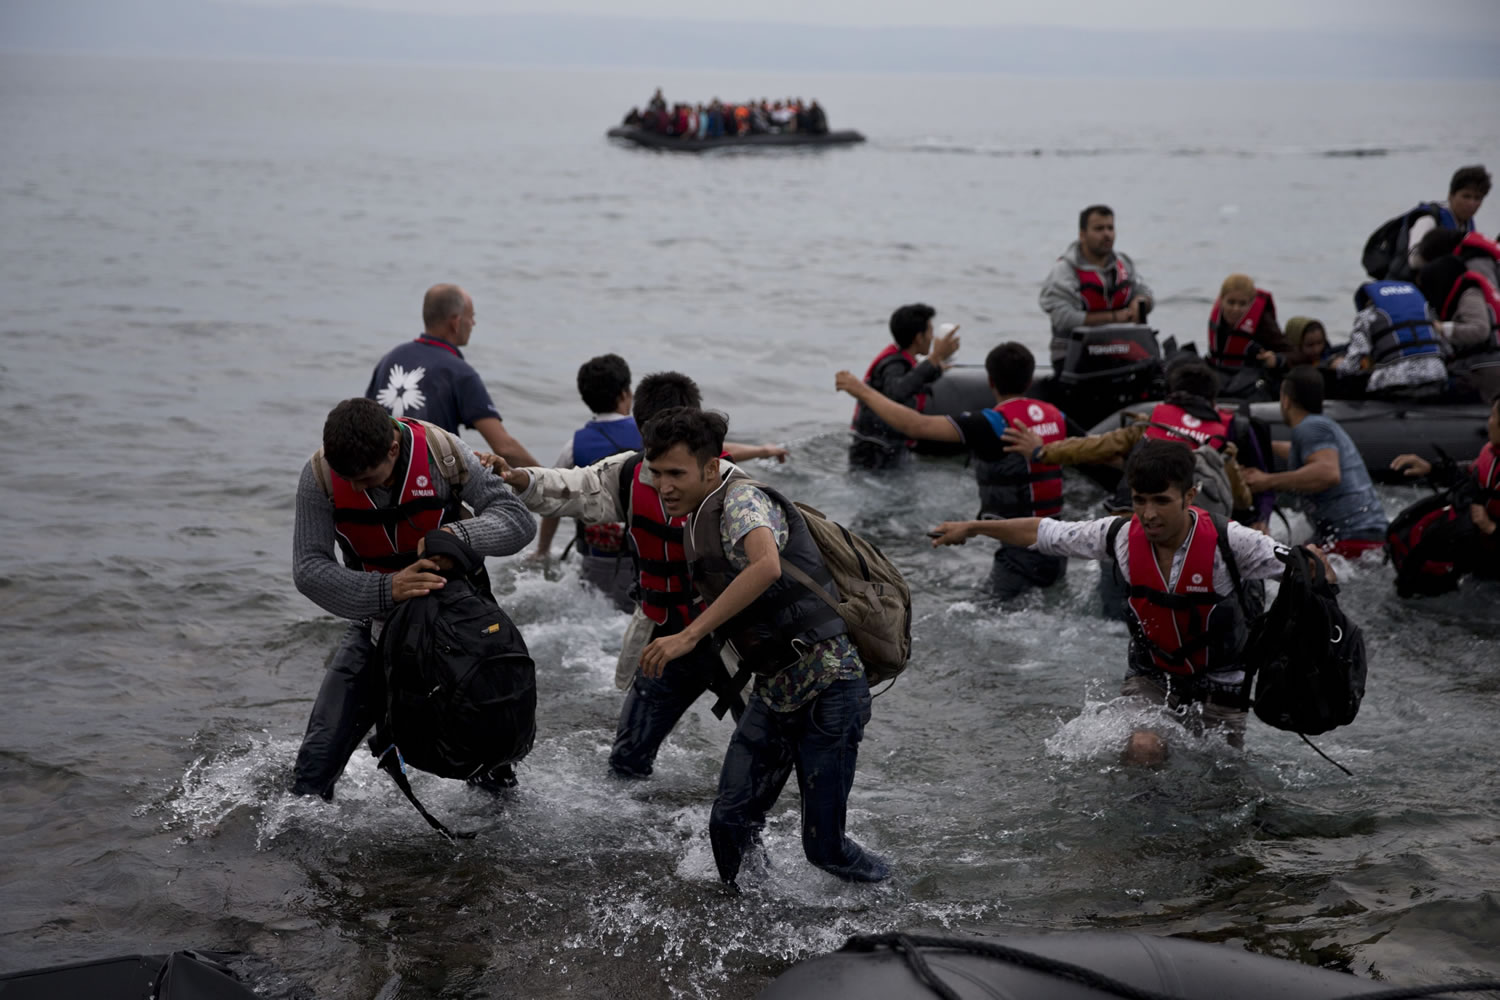 Migrants arrive on the shores of the Greek island of Lesbos Tuesday after crossing the Aegean Sea from Turkey on an inflatable dinghy. More than 260,000 asylum-seekers have arrived in Greece so far this year, most reaching the country's eastern islands on flimsy rafts or boats from the nearby Turkish coast.